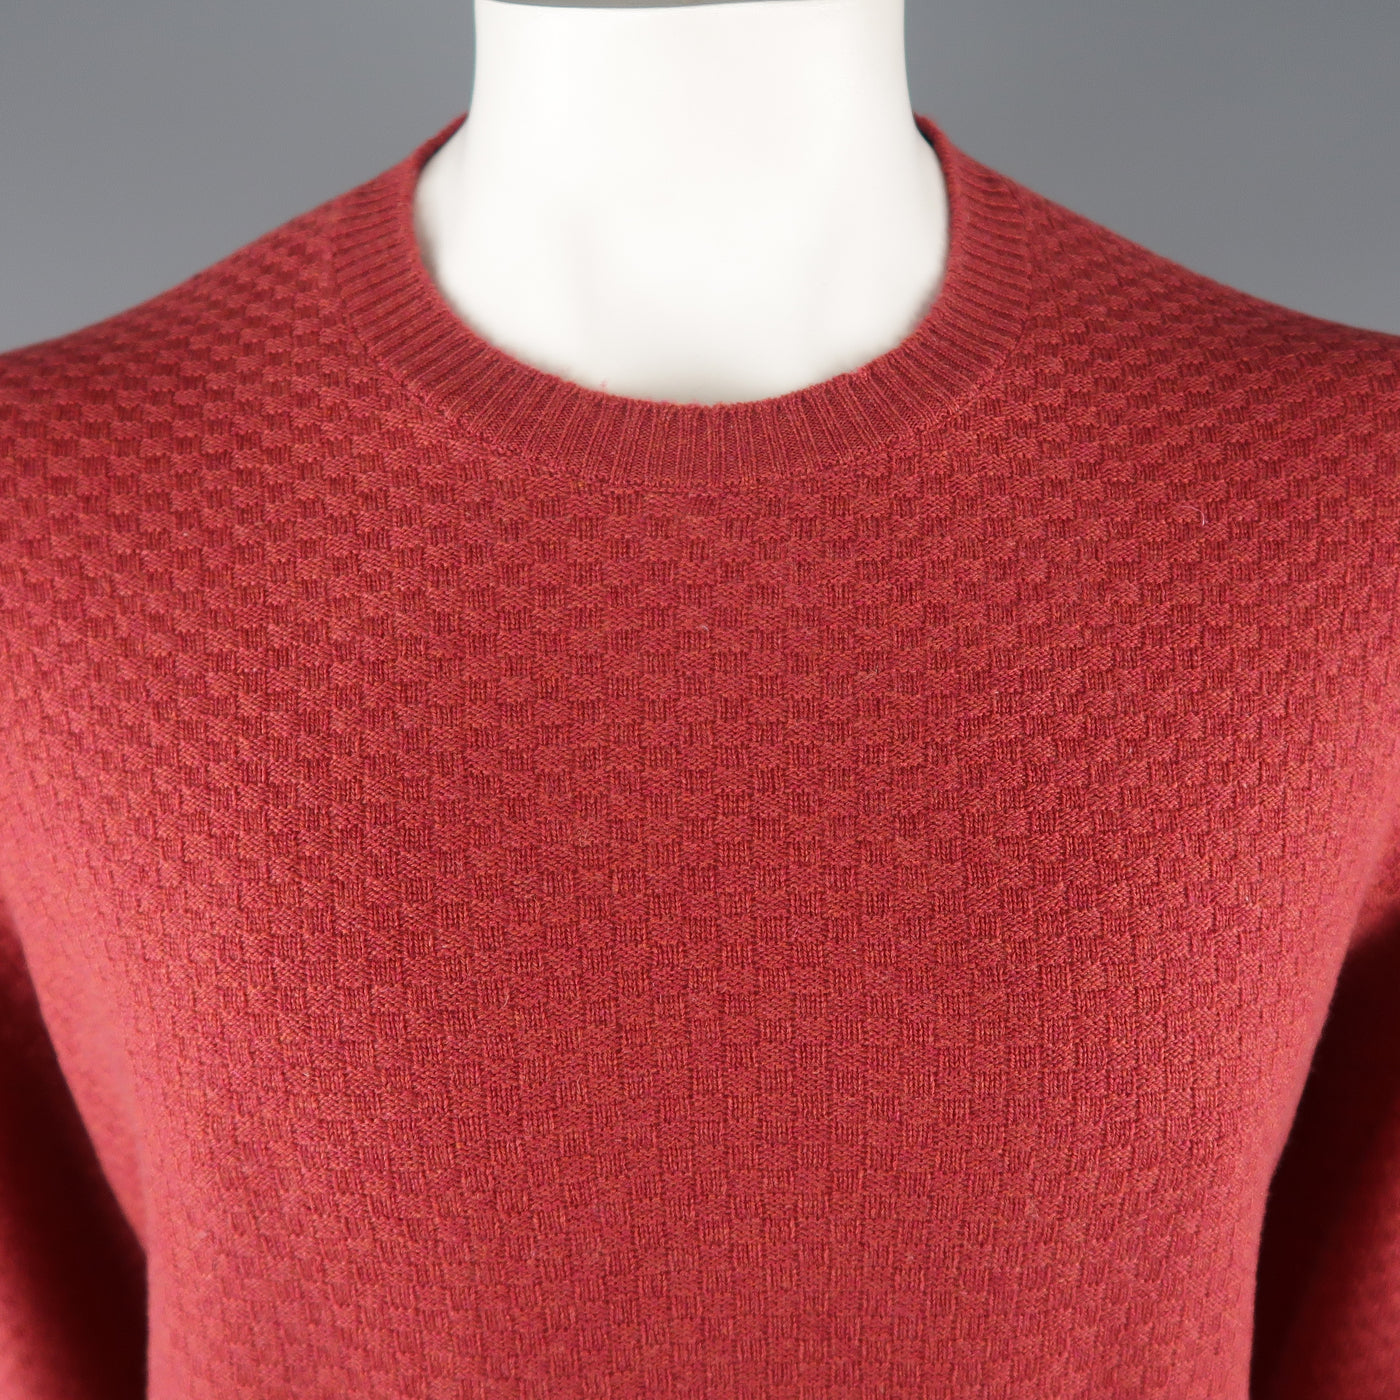 BROOKS BROTHERS Size L Brick Knitted Cashmere Crew-Neck Sweater